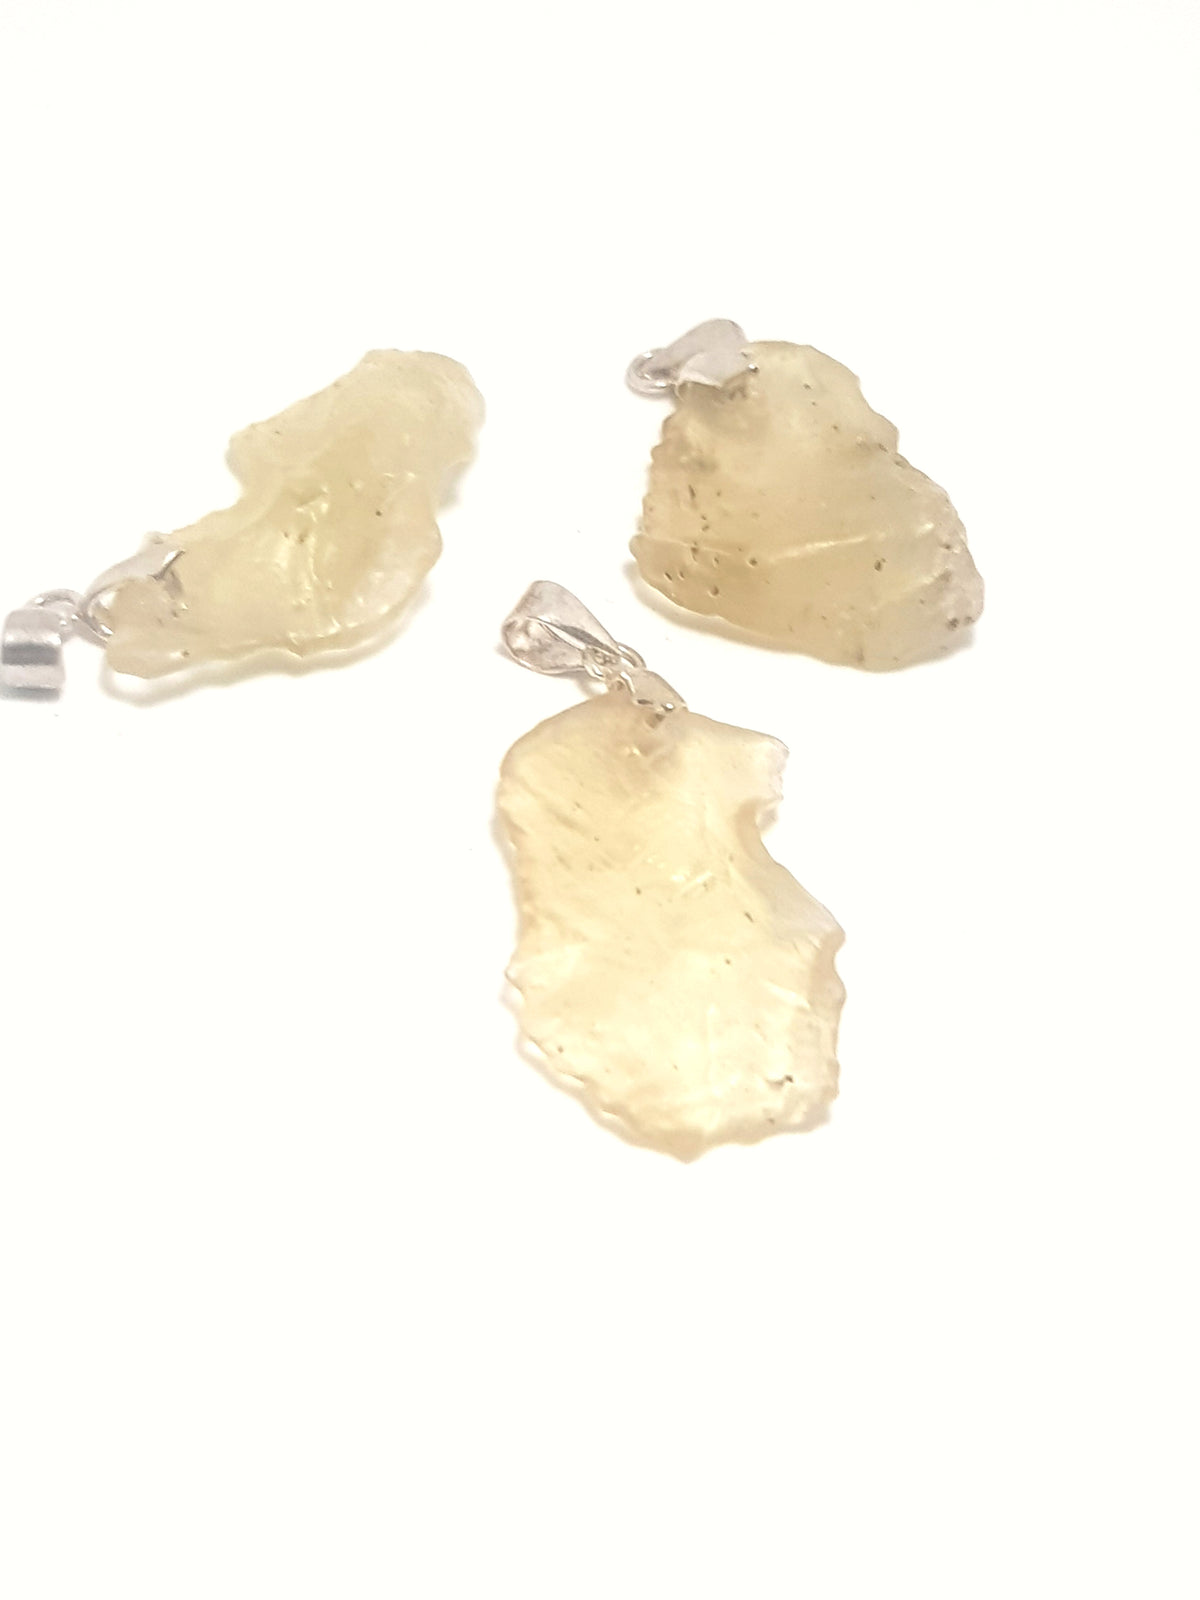 three pieces of libyan desert glass which have a metallic setting on one end turning them into pendants